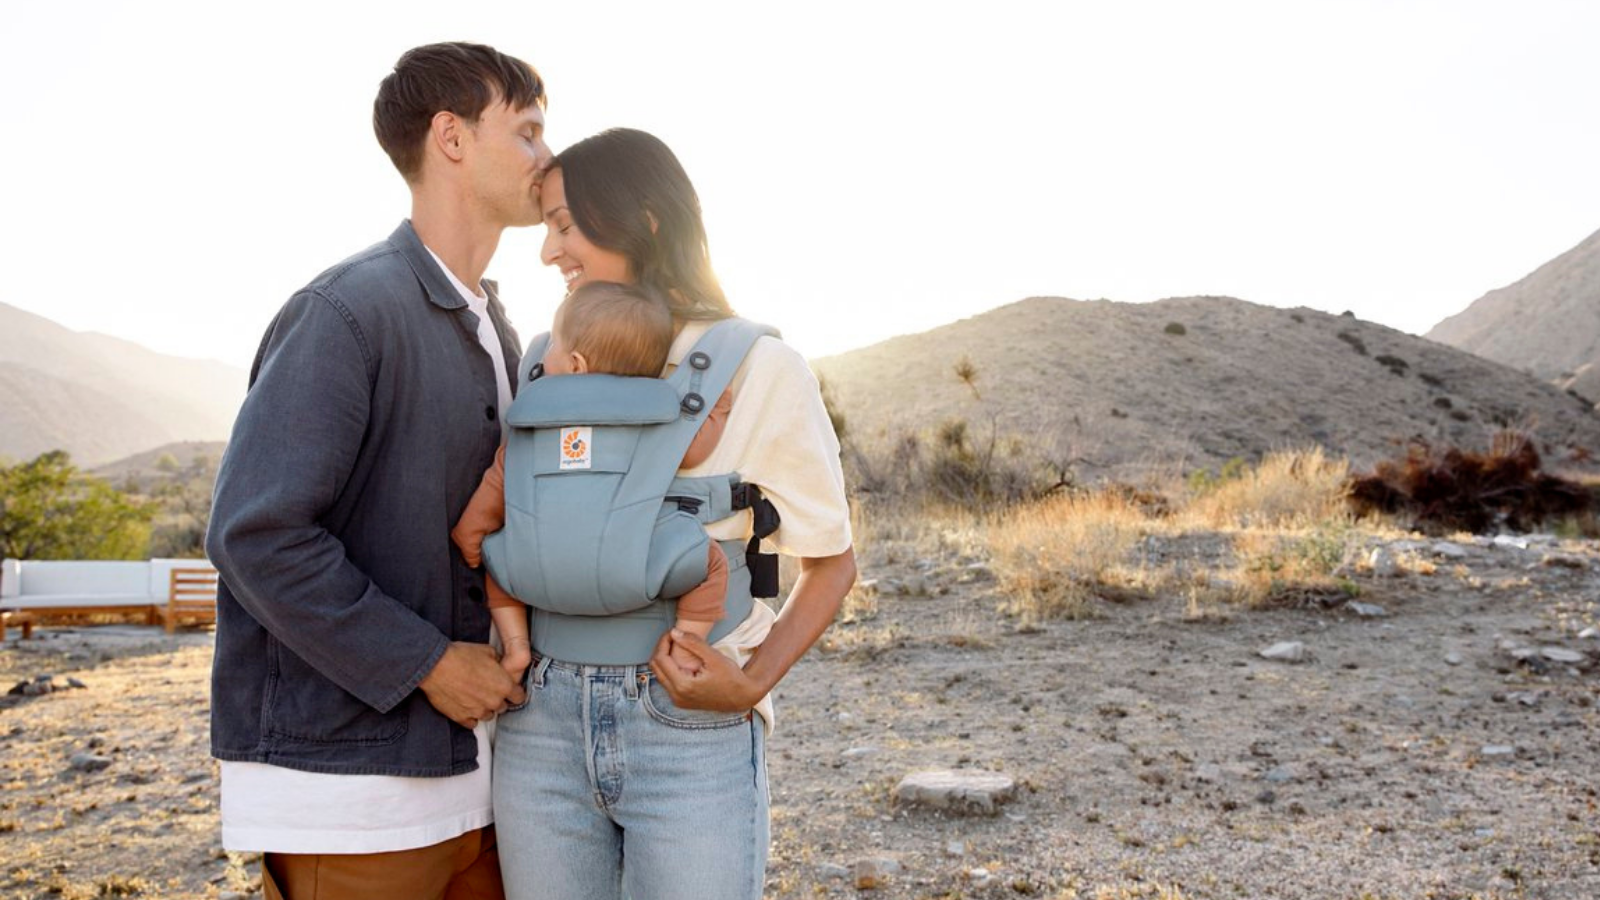 Woman carries baby in Ergobaby Omni Dream baby carrier while man kisses her head